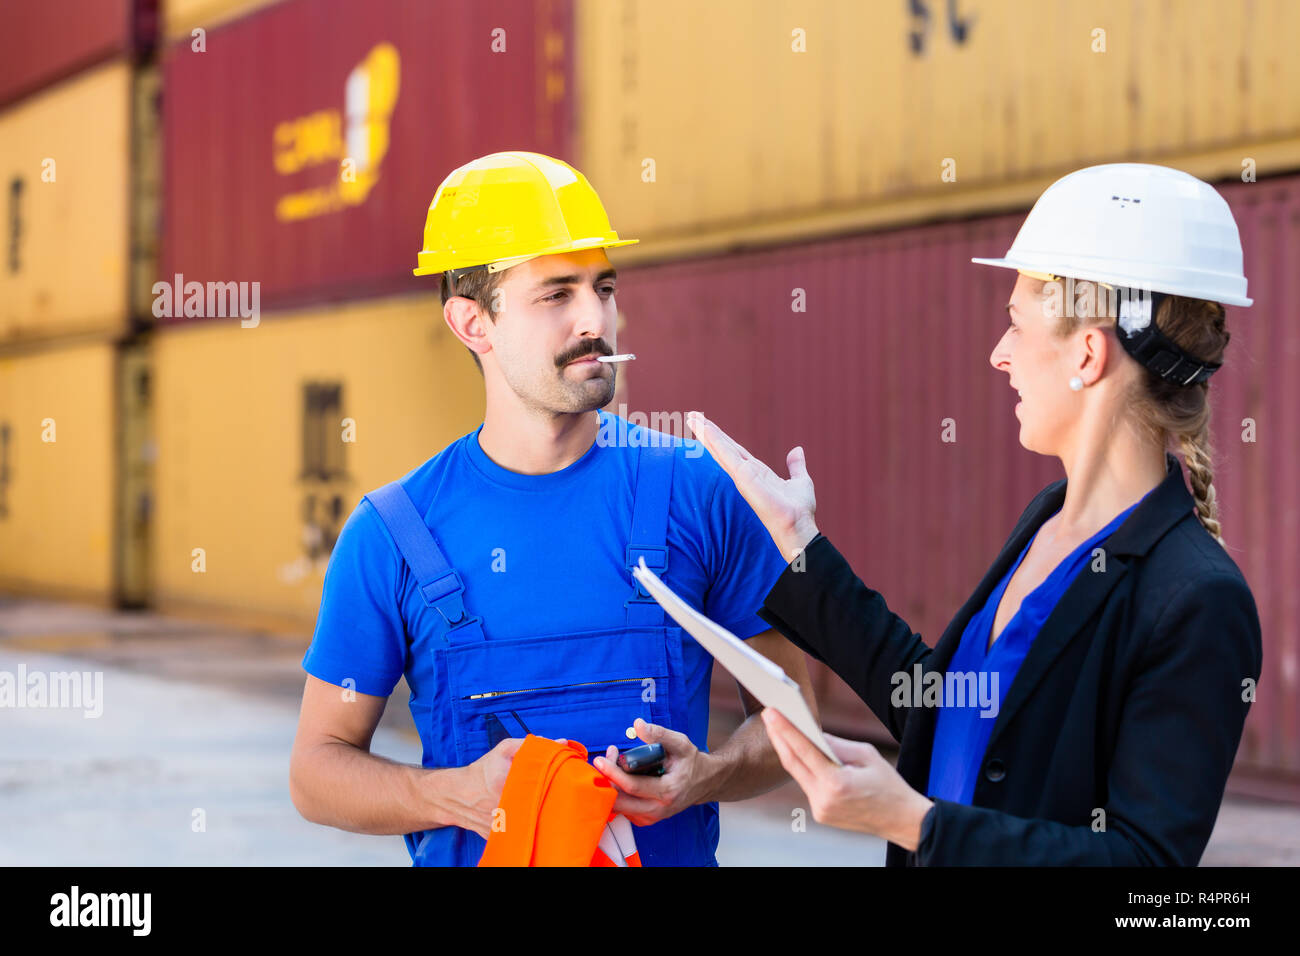 Smoking employee in port or container terminal Stock Photo